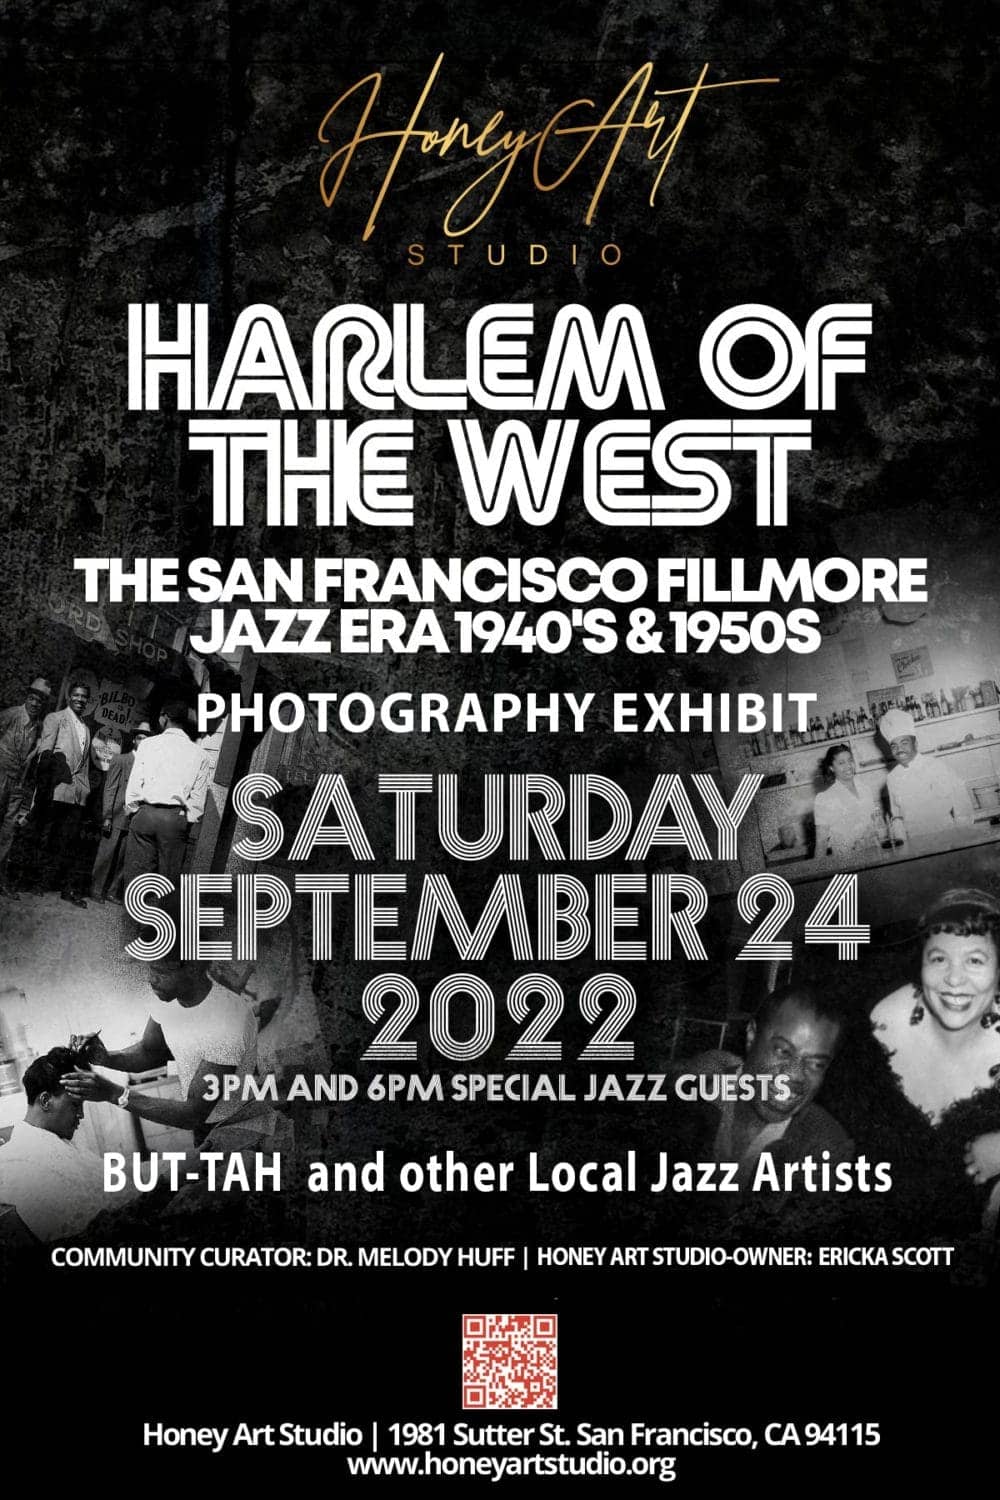 Harlem-of-the-West-exhibit-0922, SF Bay View, 